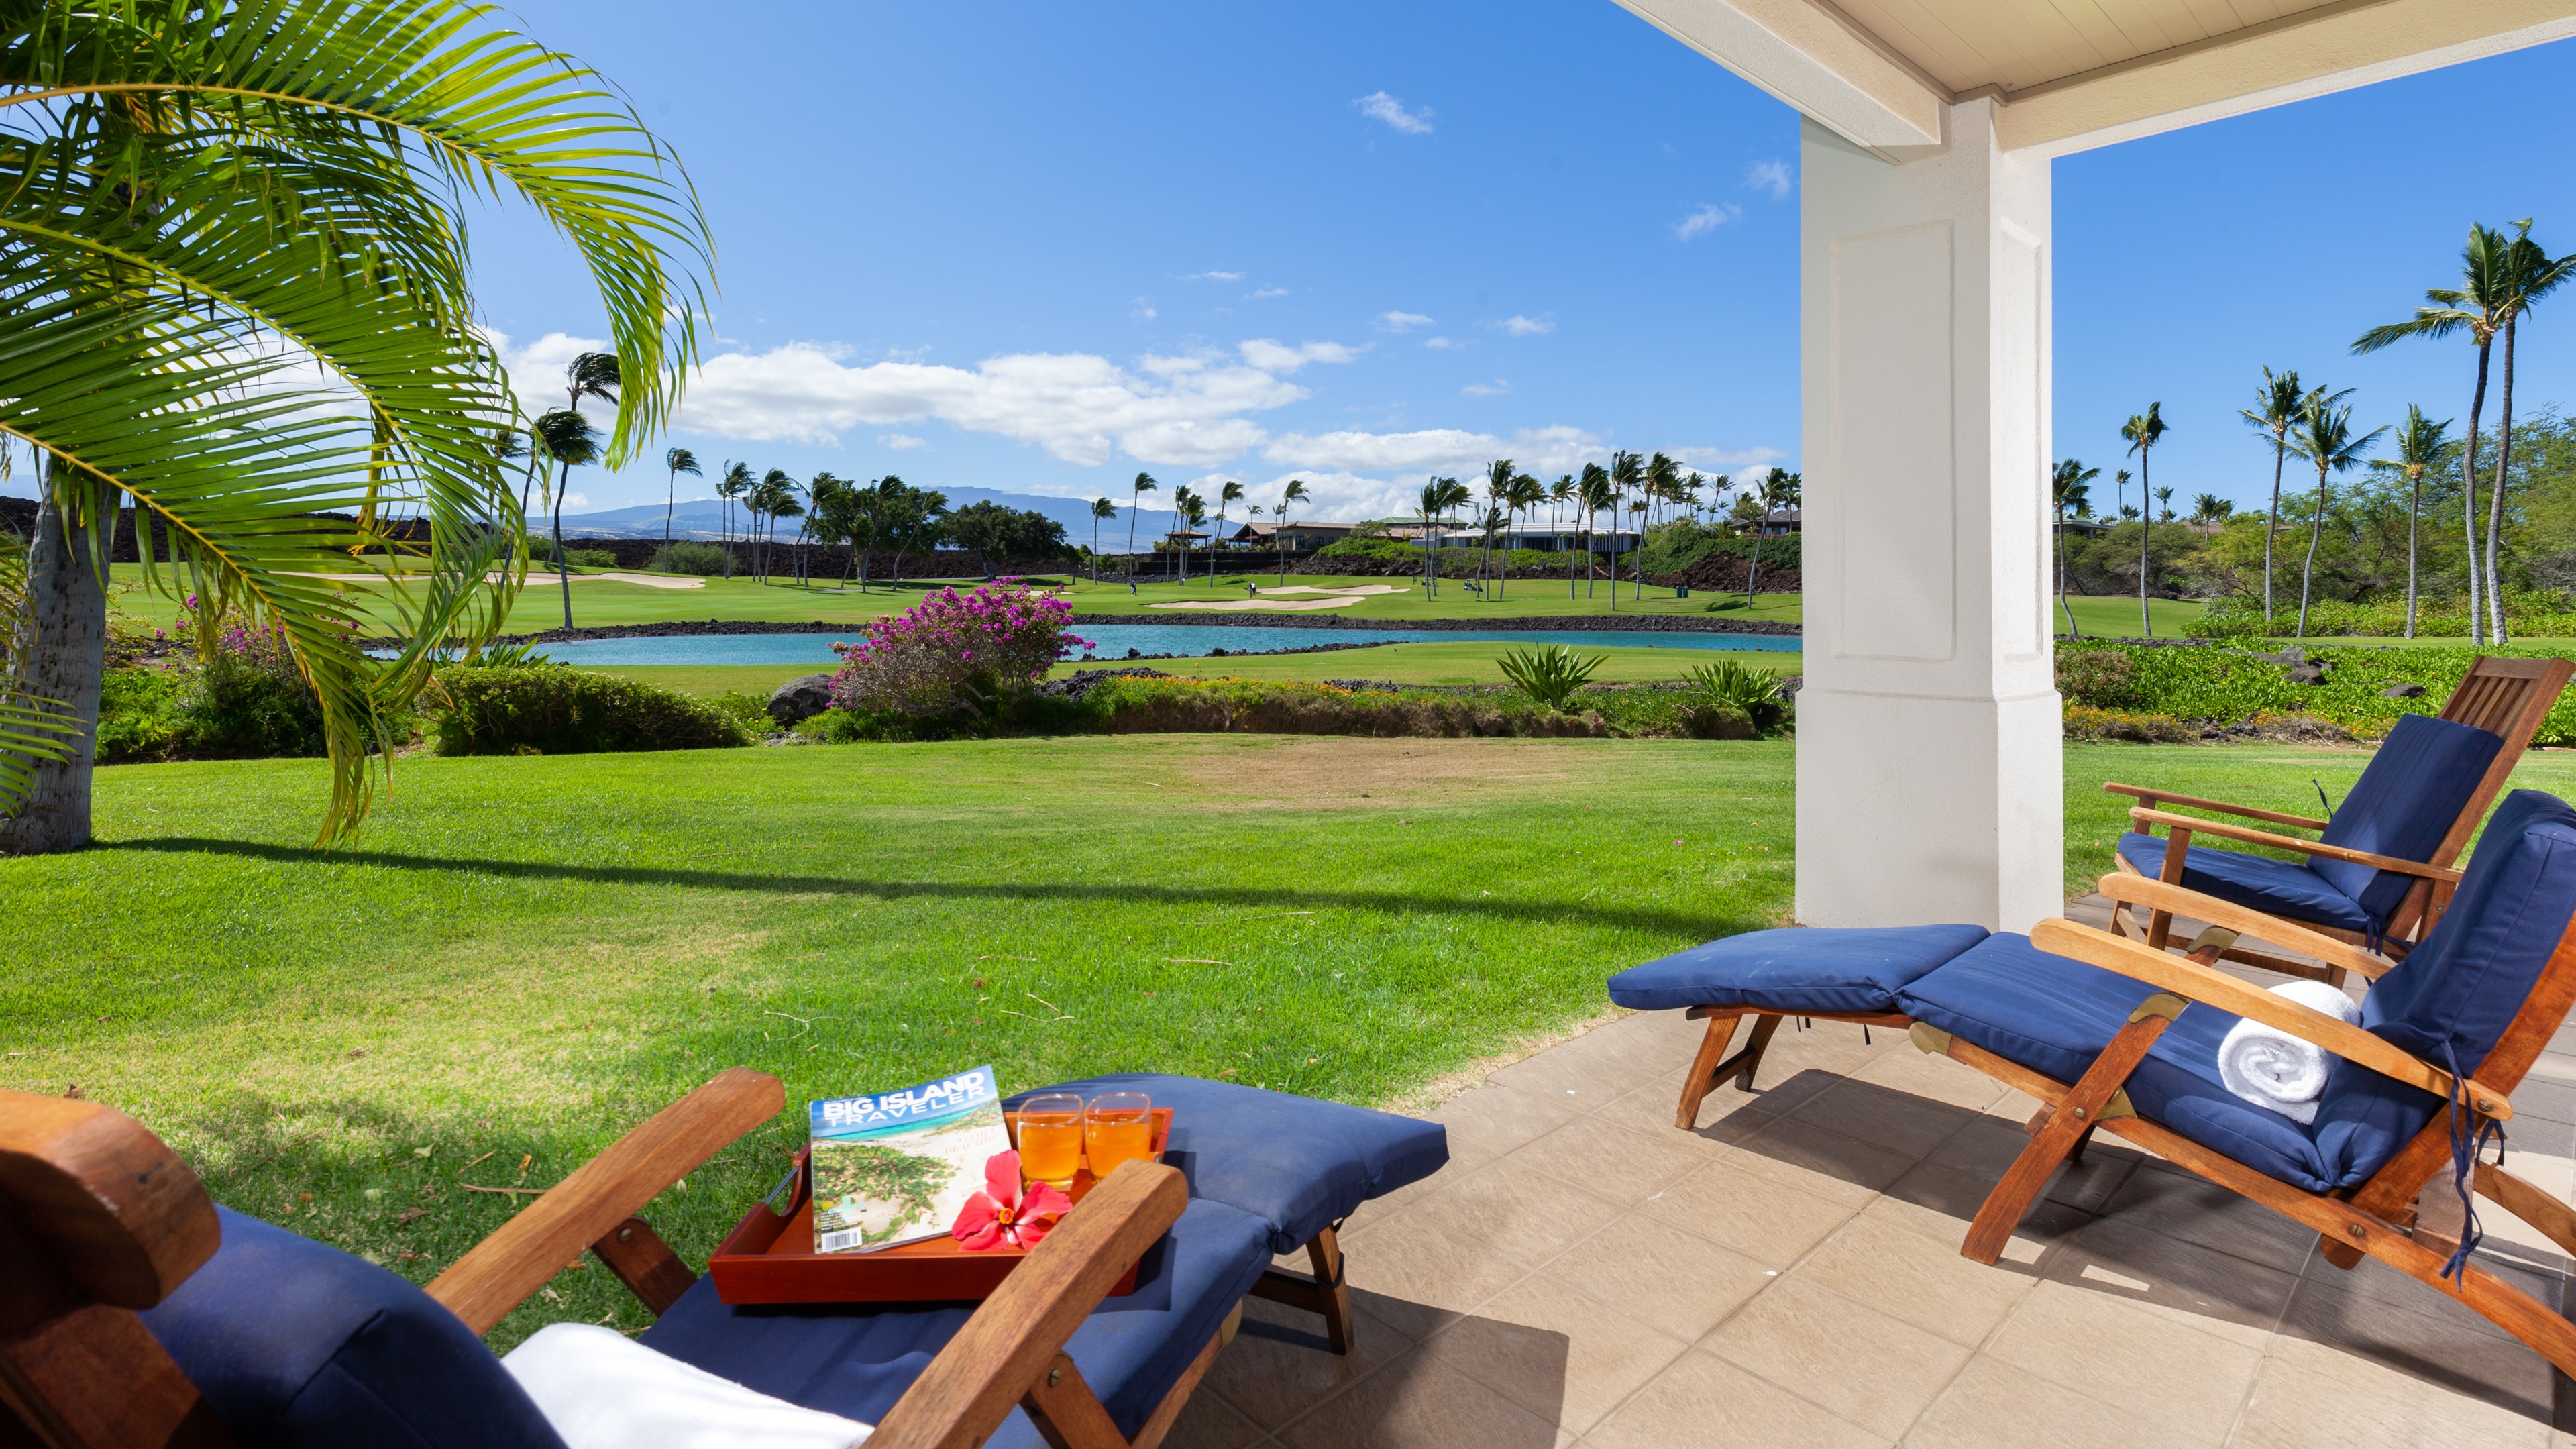 Welcome to Island Melody, view of Mauna Lani golf course and pond from lanai